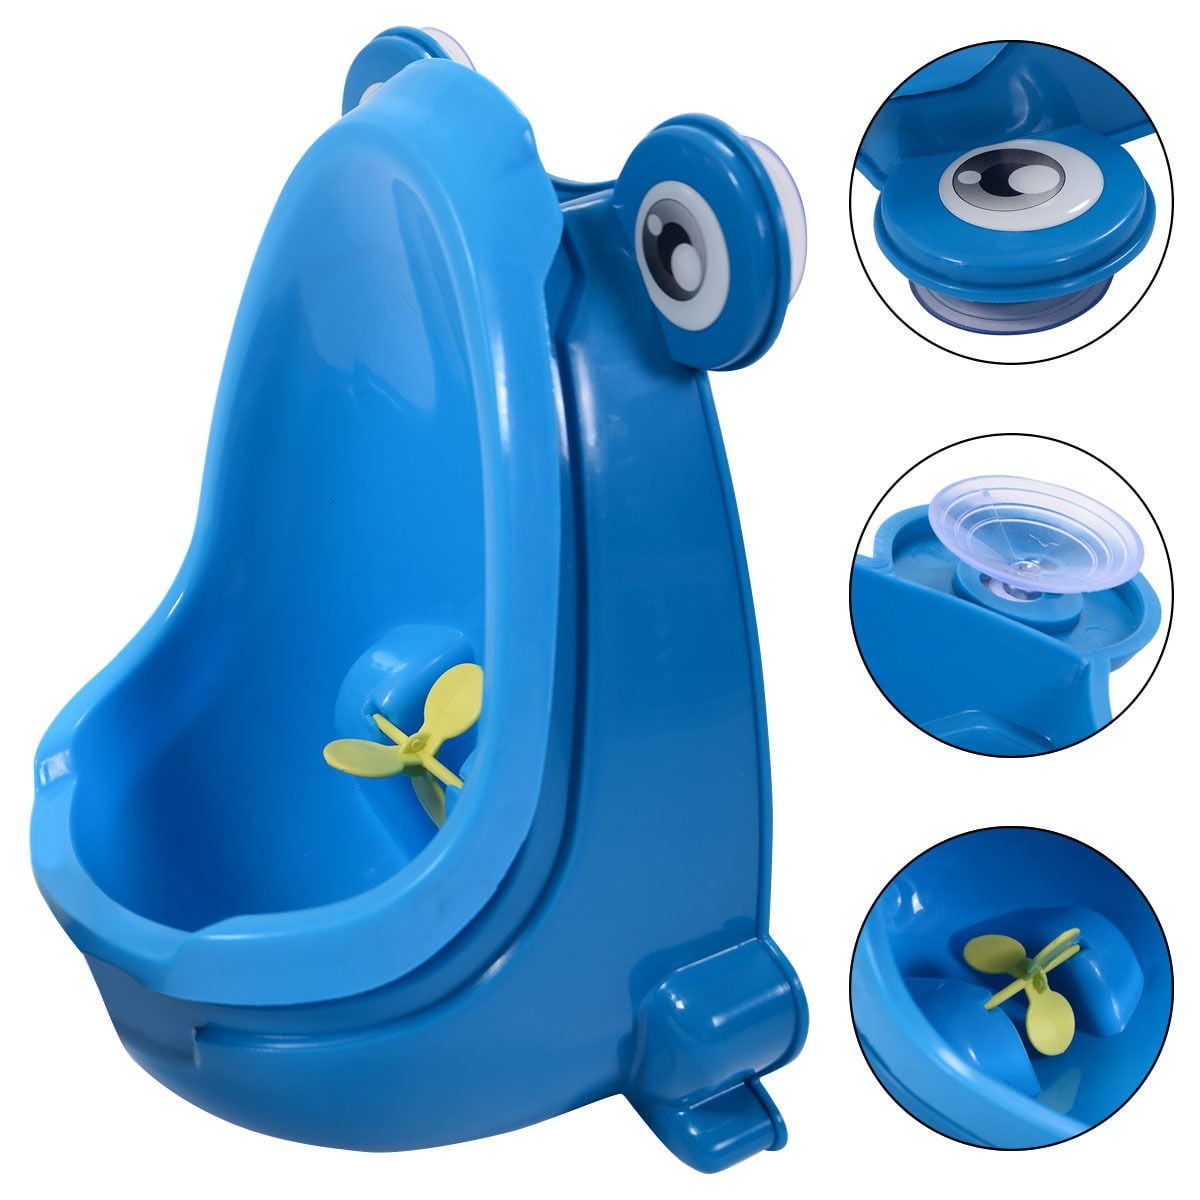 Adorable Frog  Urinal for Boys with Funny Aiming Target-Blue 